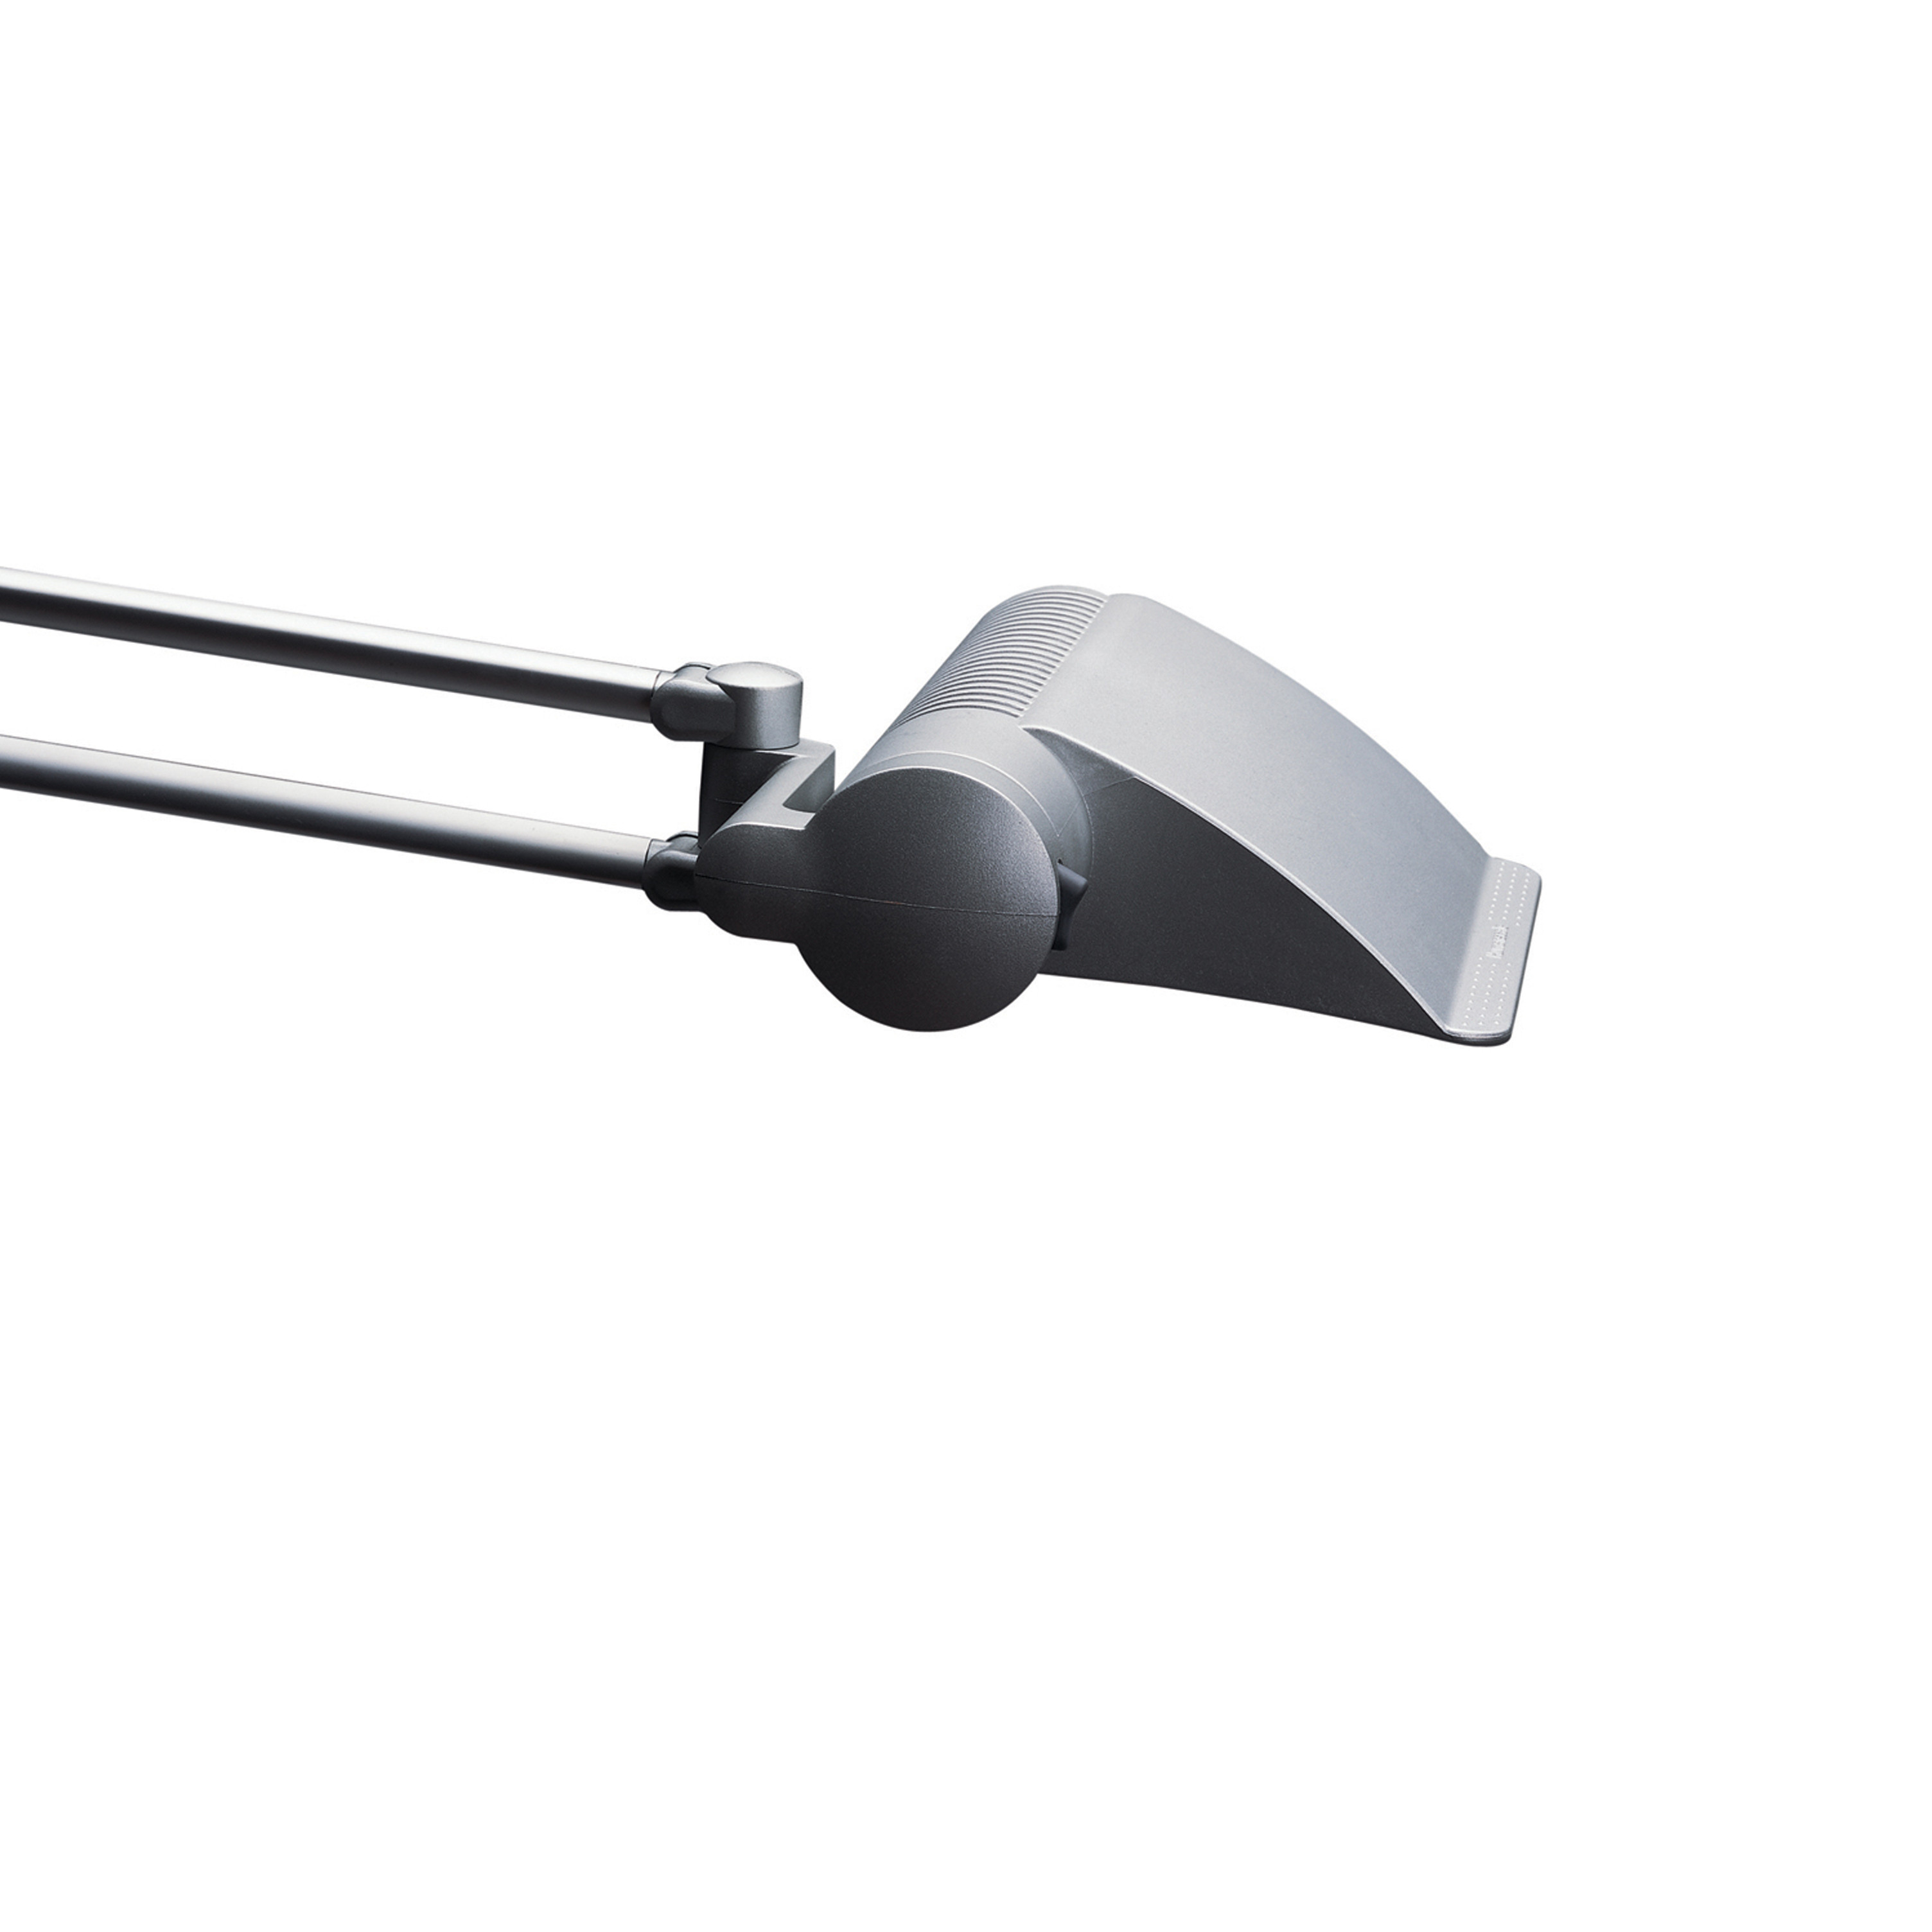 Diffrient Task Light by Humanscale